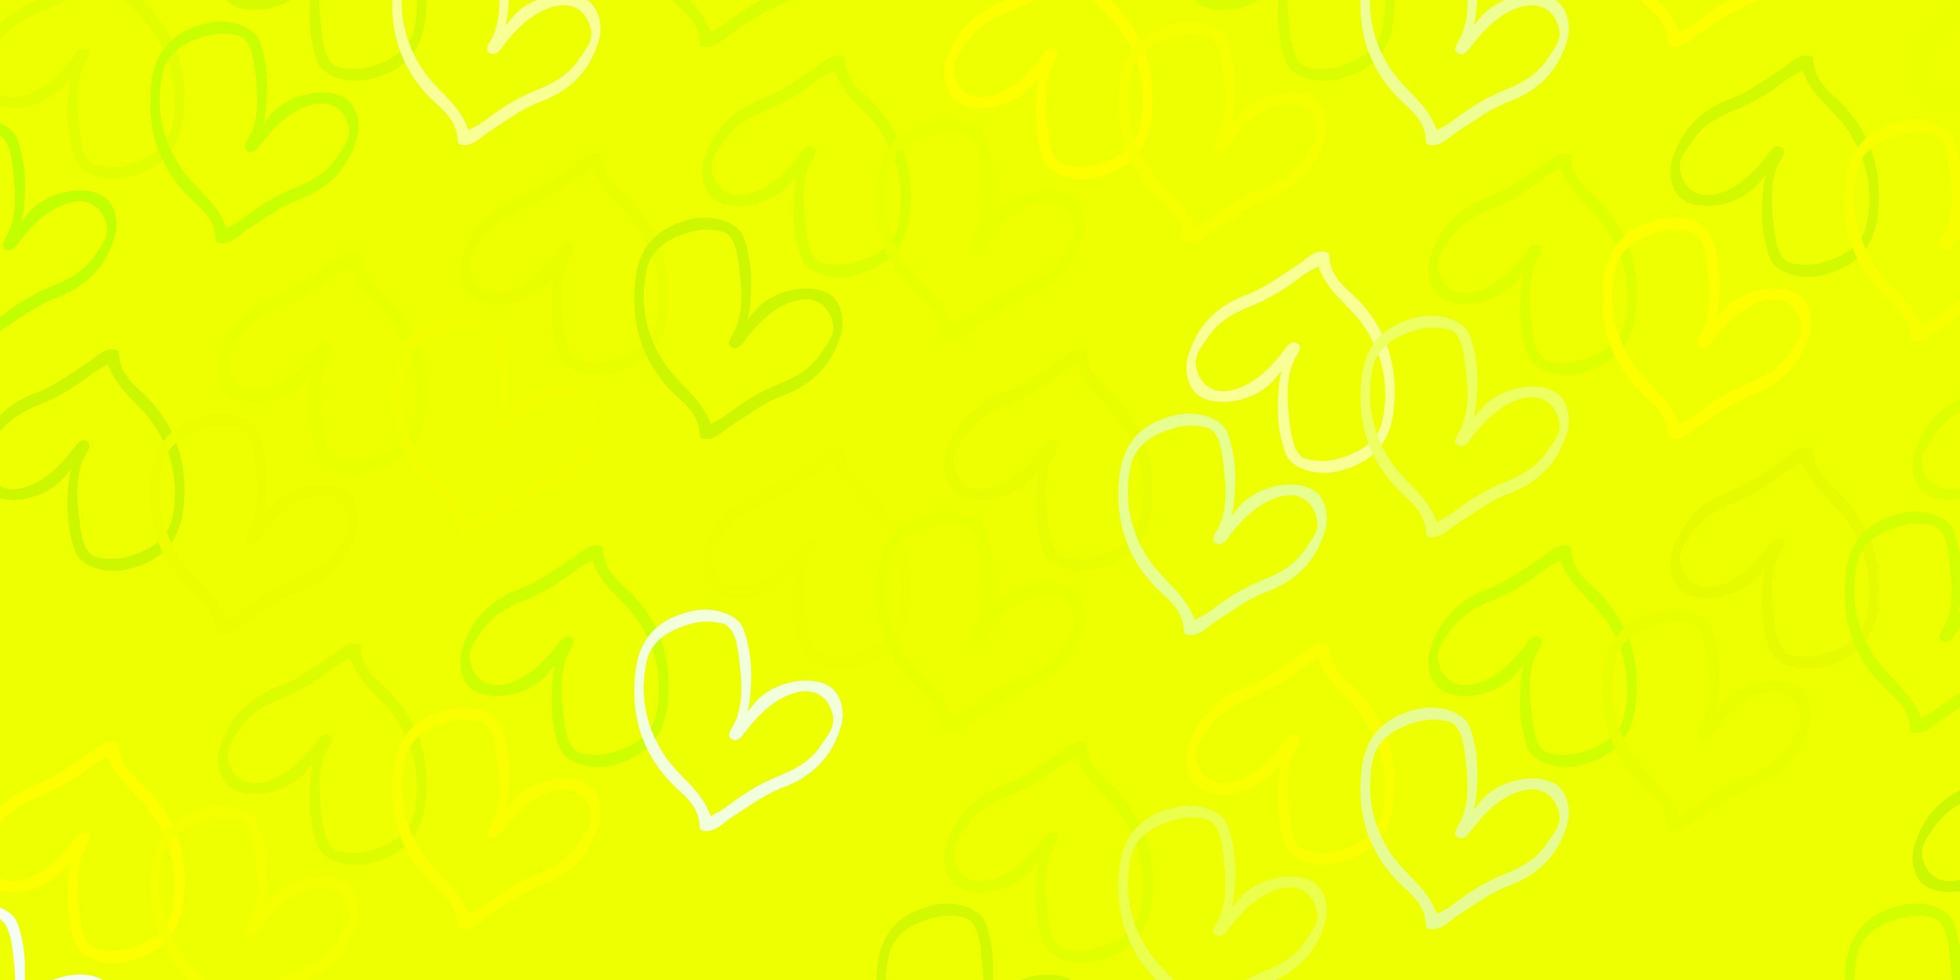 Light Green, Yellow vector background with Shining hearts.